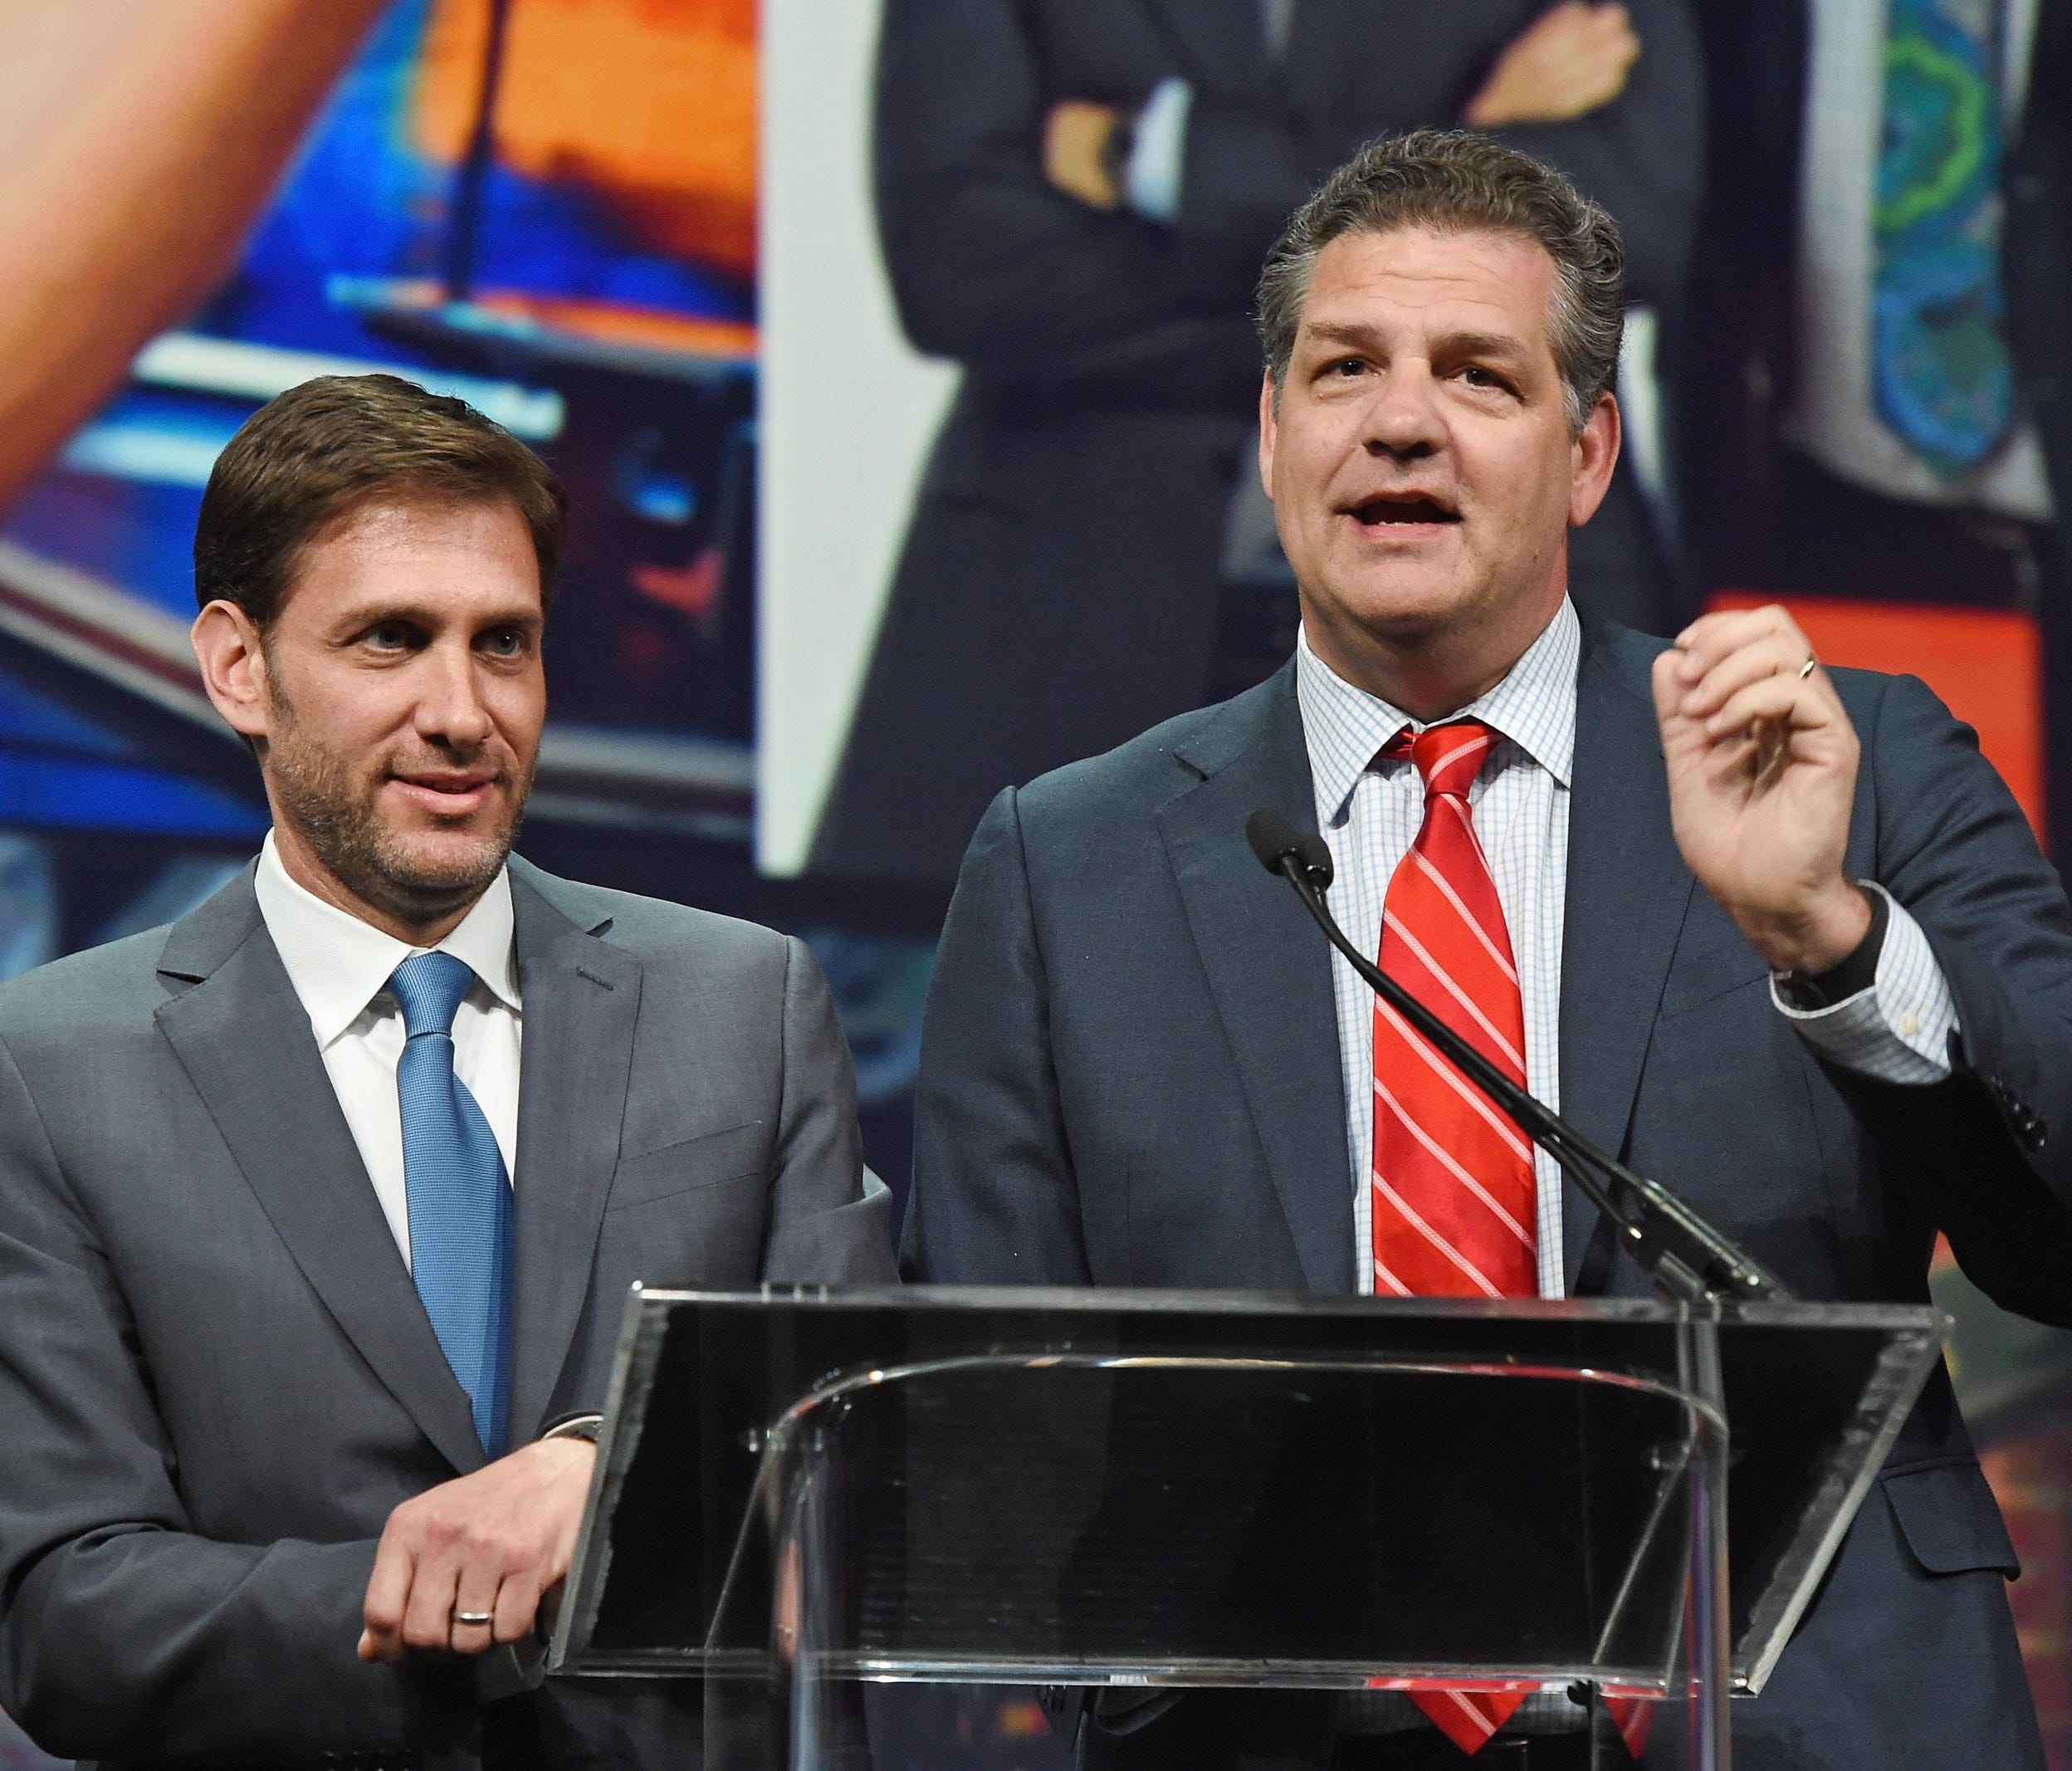 LAS VEGAS, NV - APRIL 19:  Sports broadcasters Mike Greenberg (L) and Mike Golic, hosts of ESPN Radio's 